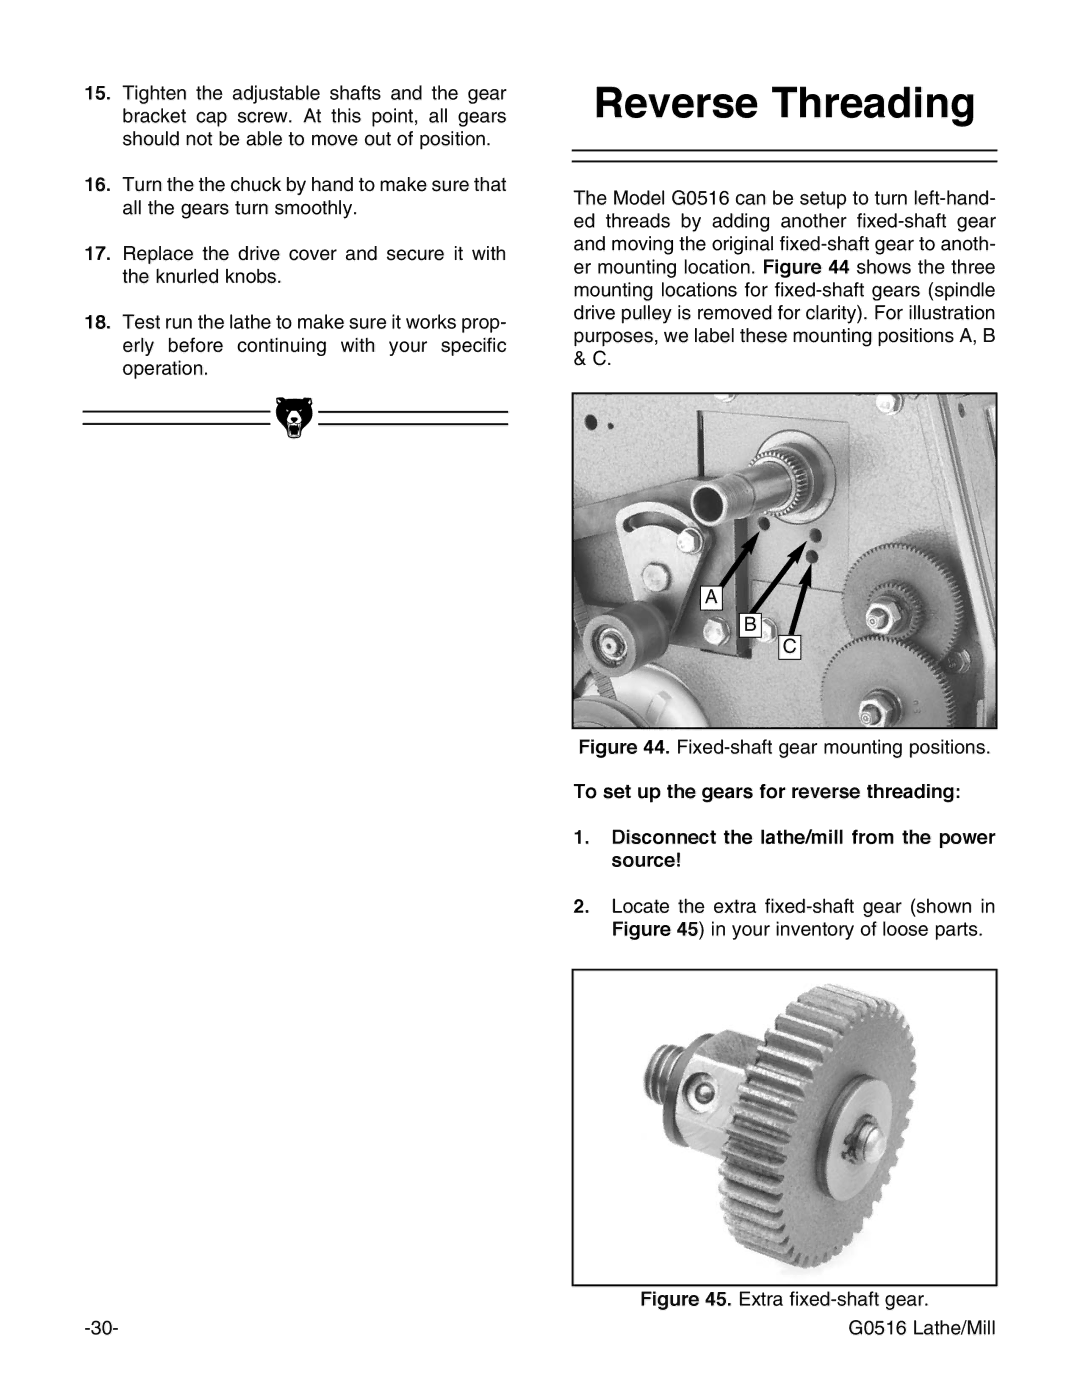 Grizzly G0516 instruction manual Reverse Threading, Fixed-shaft gear mounting positions 